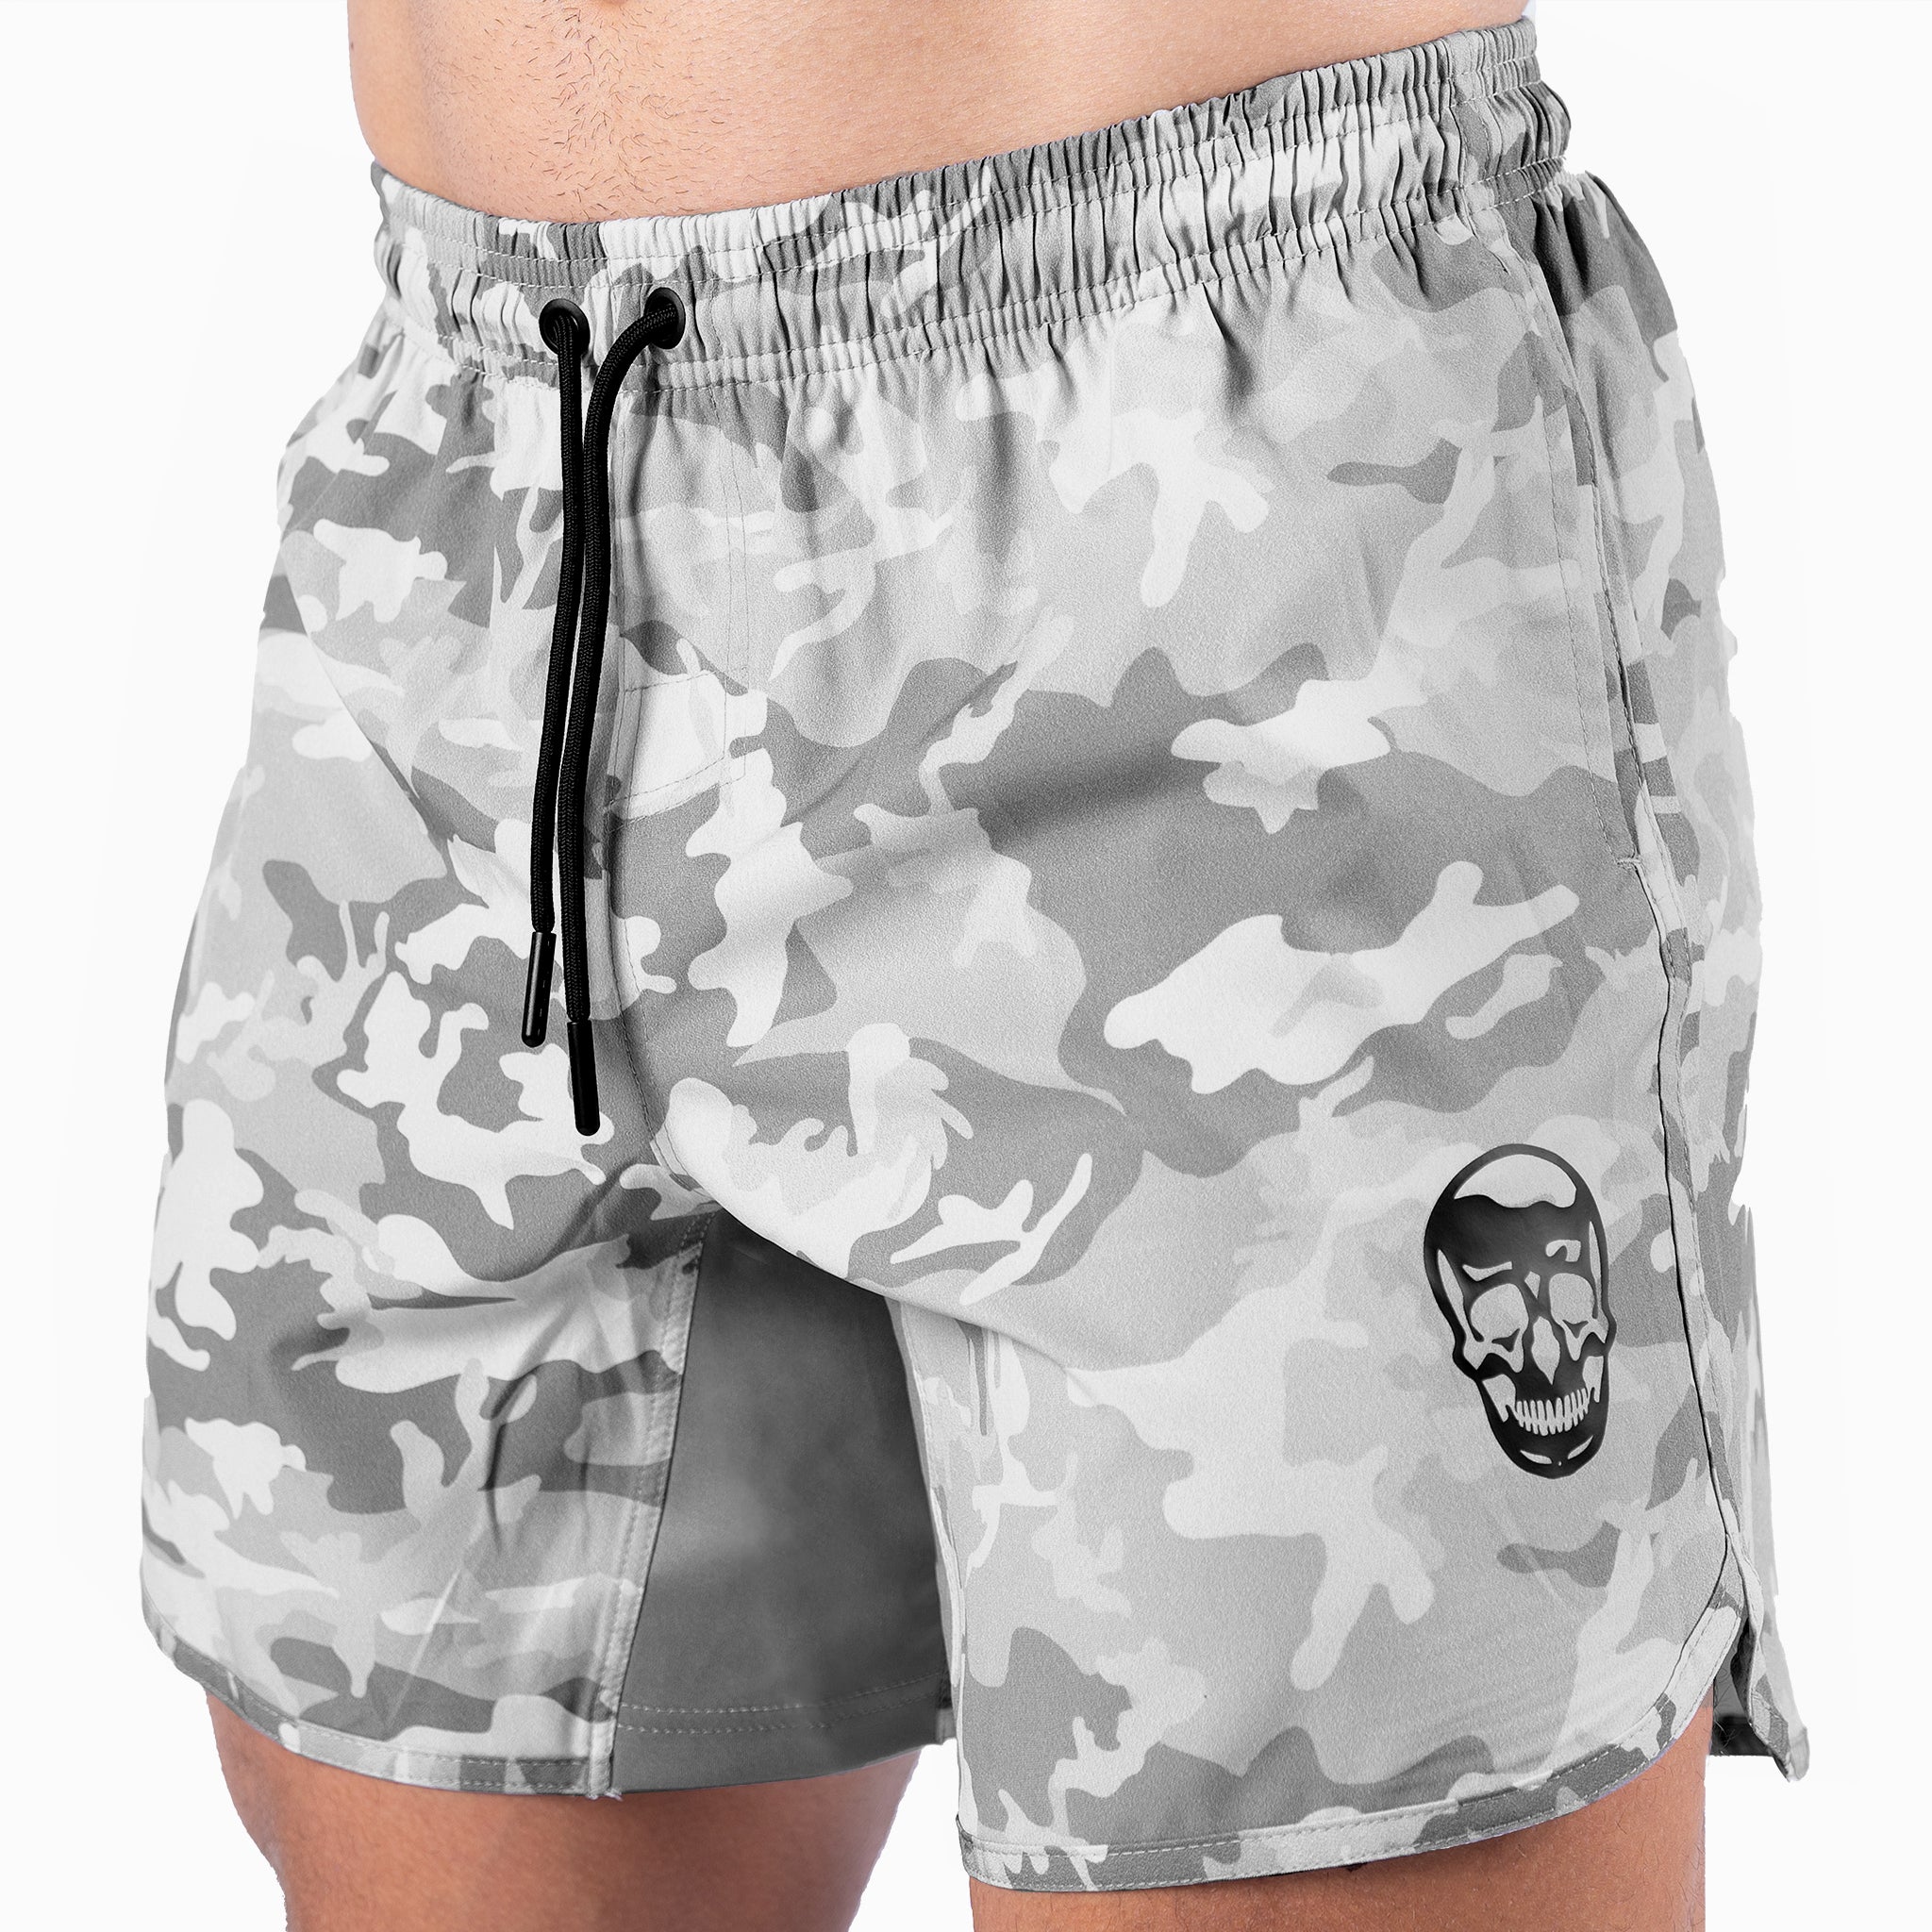 gr training shorts white camo cropped front new